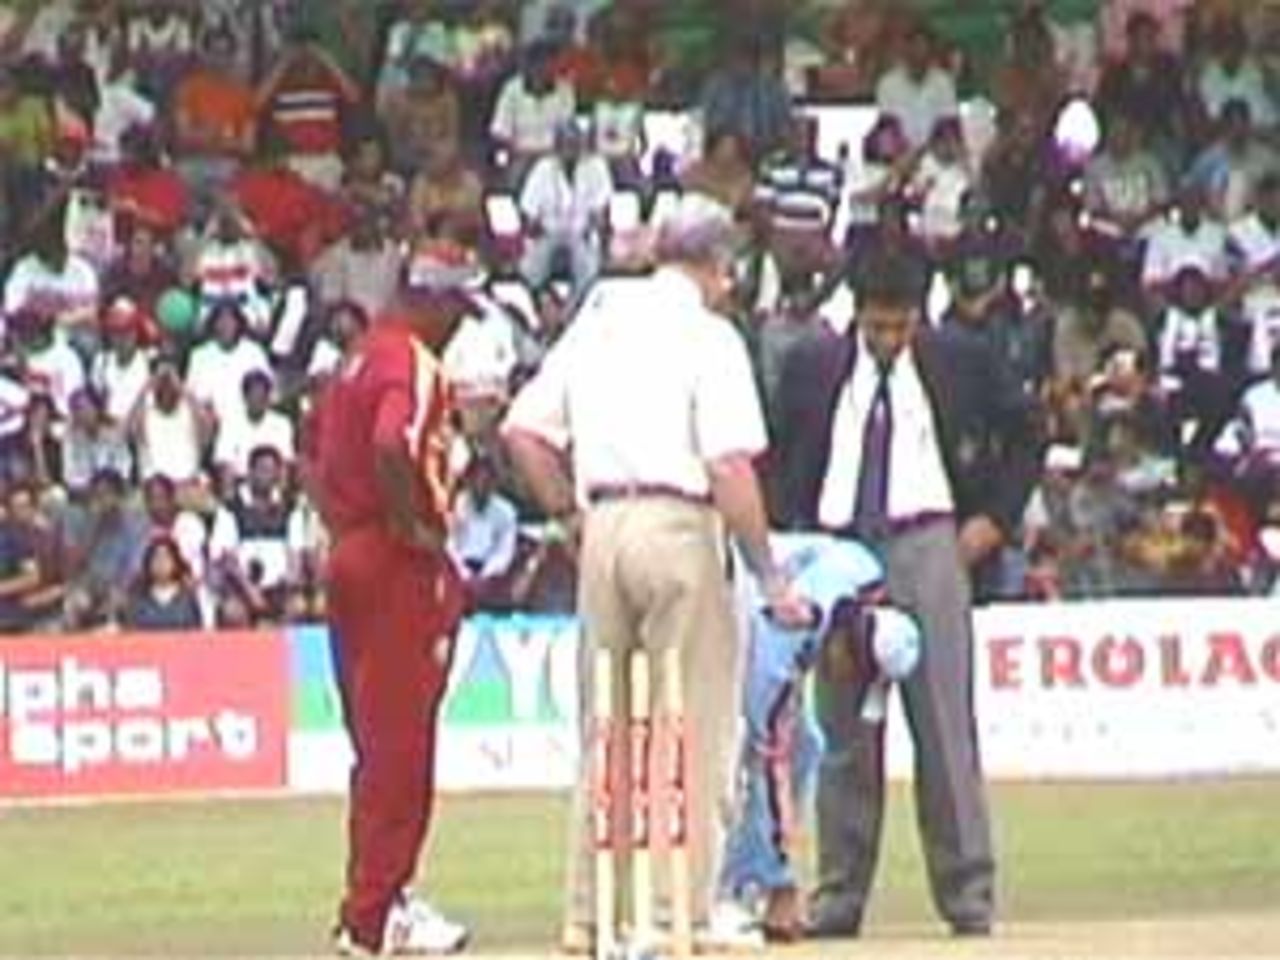 Brian Lara and Ganguly at the toss, India v West Indies (3rd ODI), Coca-Cola Singapore Challenge, 1999-2000, Kallang Ground, Singapore, 5 Sep 1999.